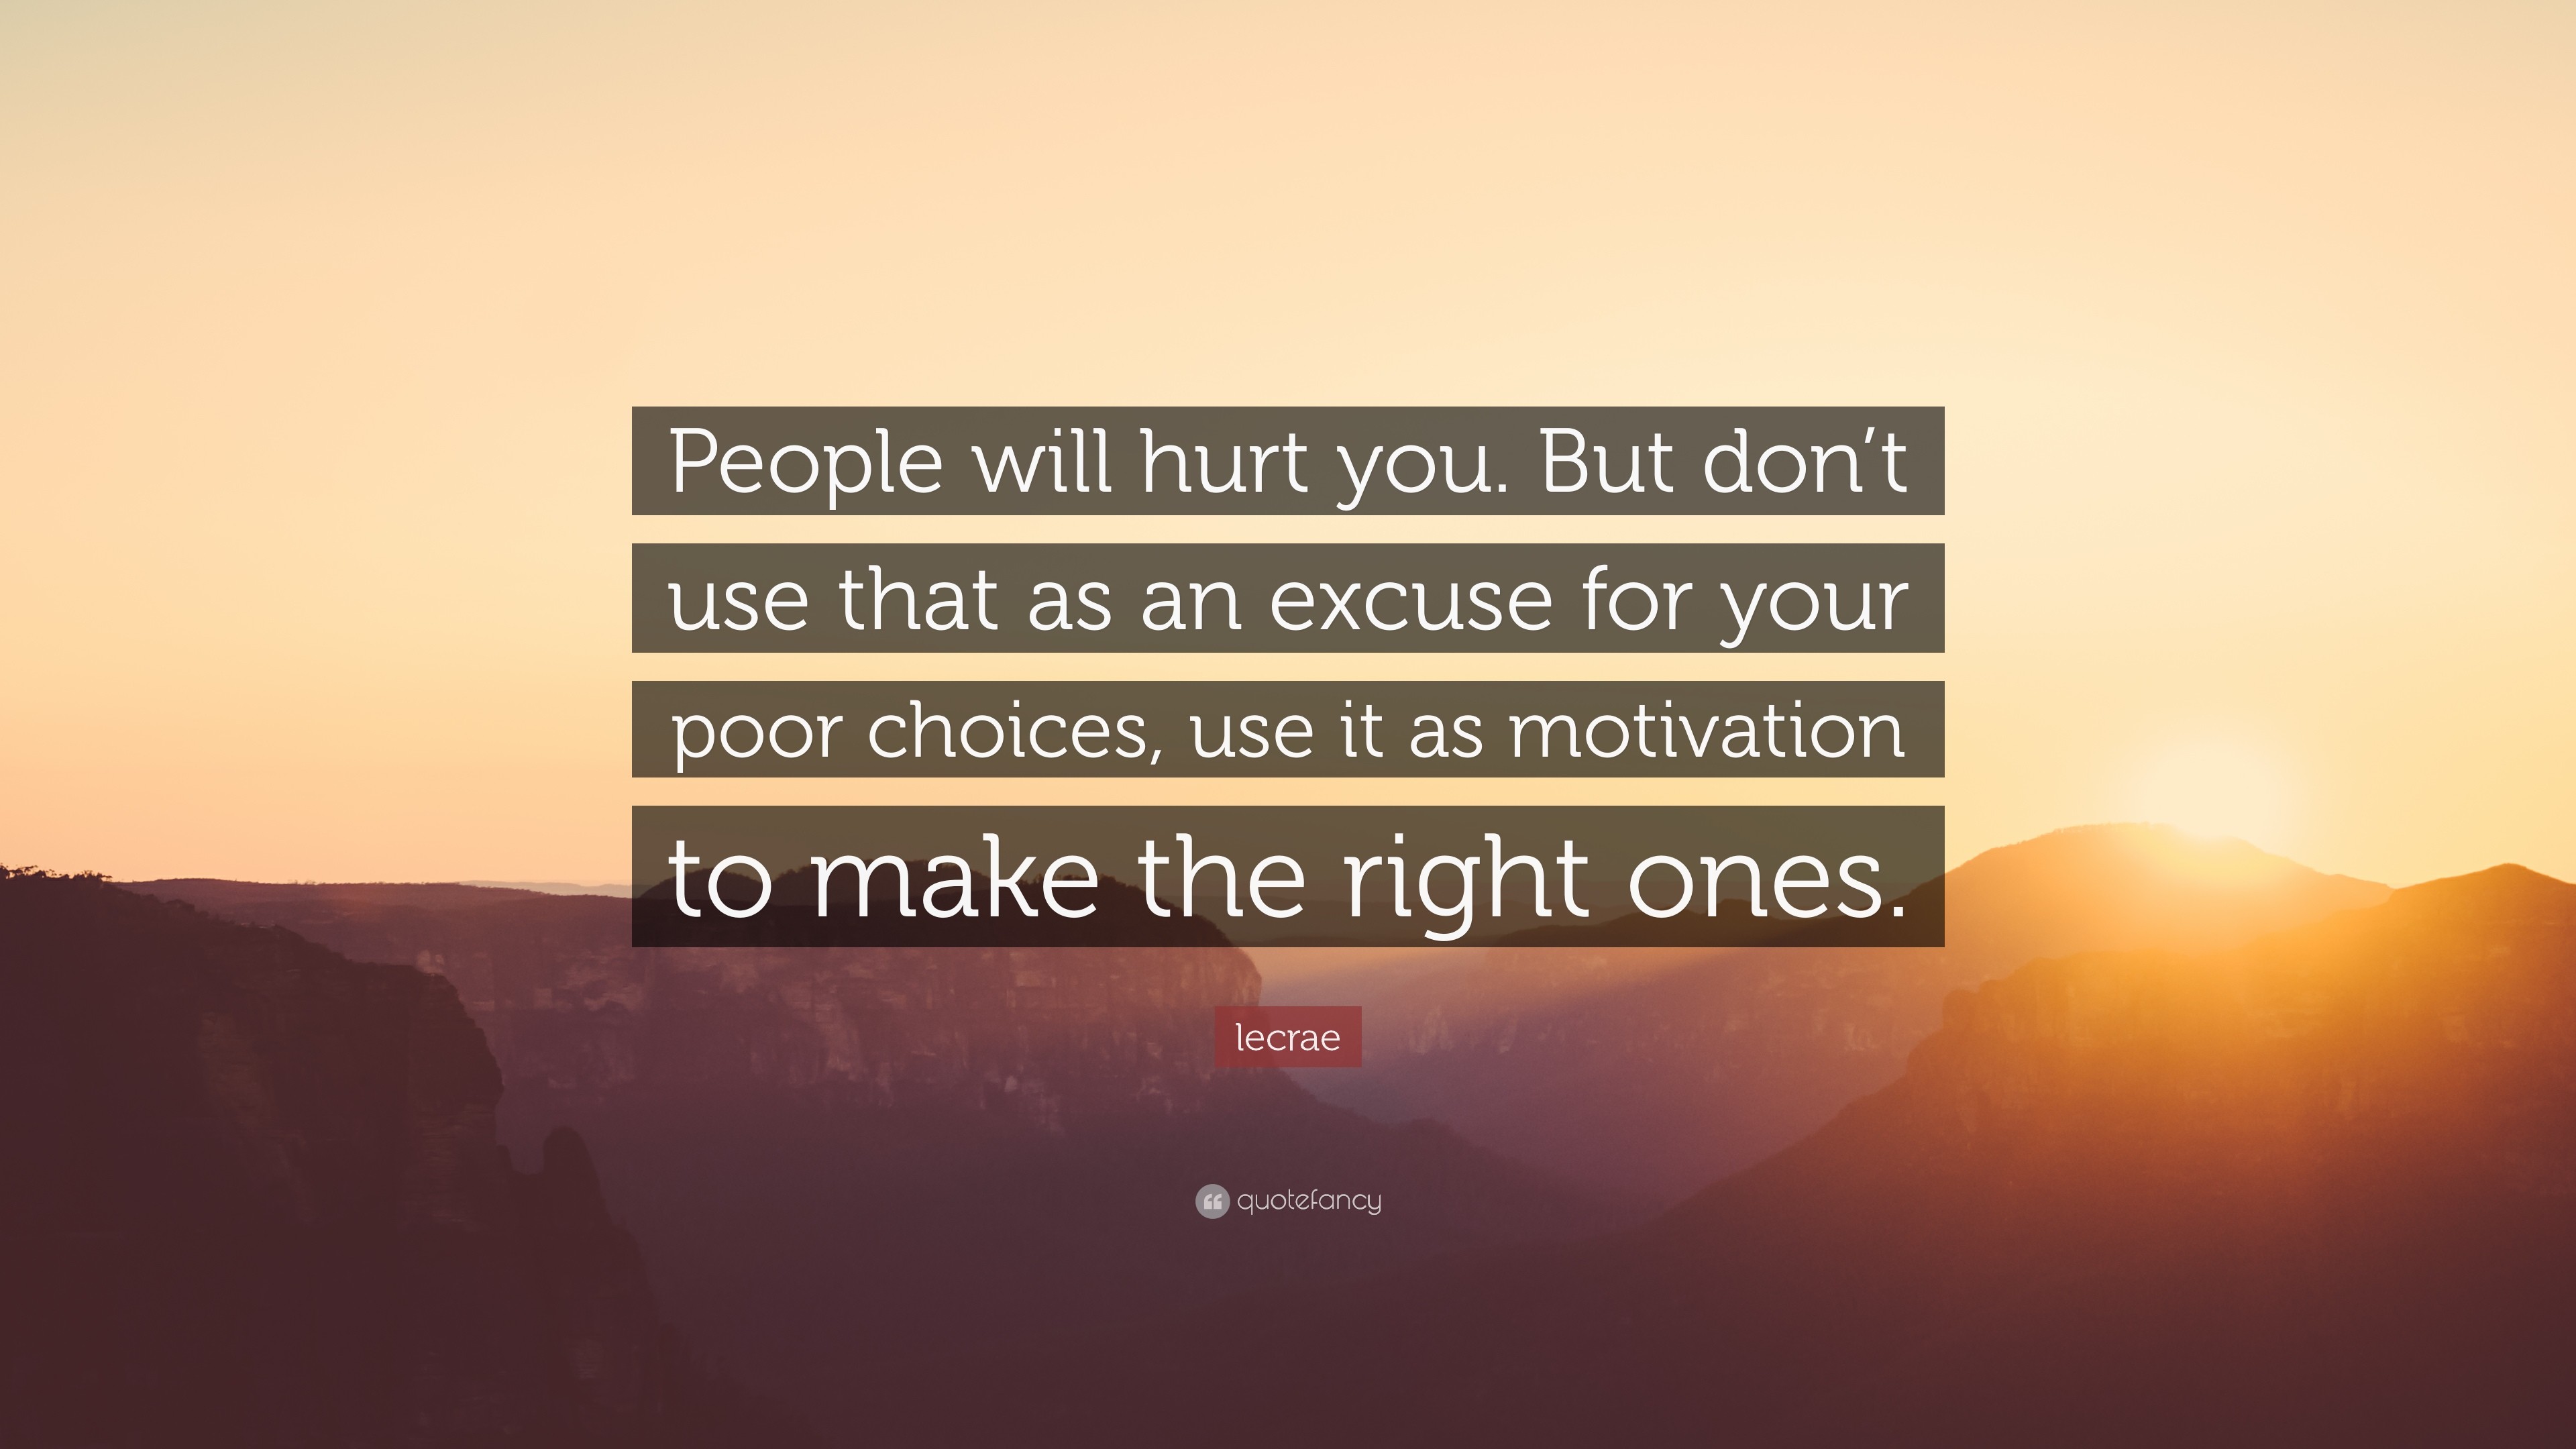 3840x2160 Lecrae Quote: “People will hurt you. But don't use that as